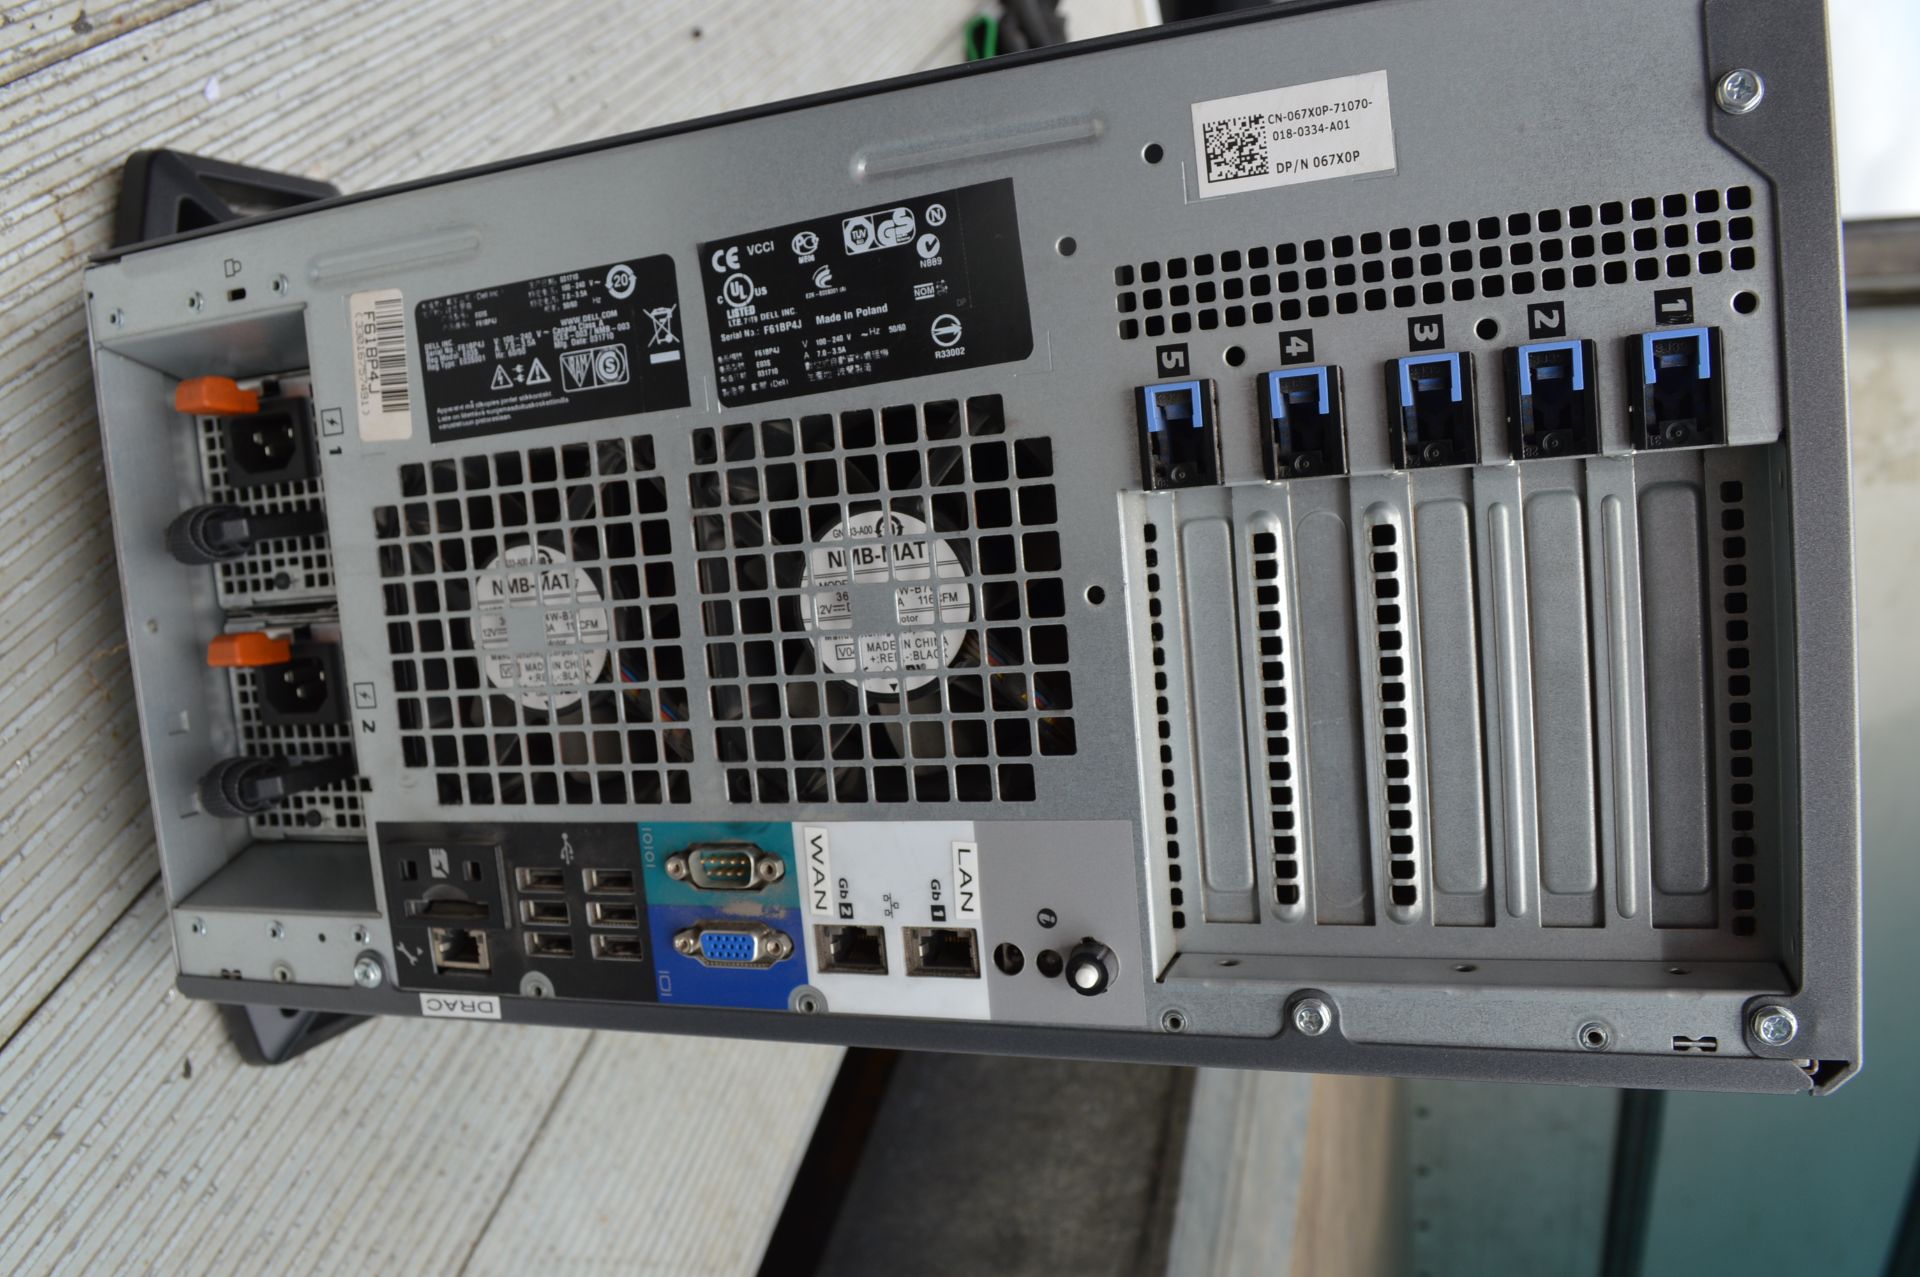 Dell Poweredge T610 E035 Towerserver with 2: 15K 146GB Drives 2: 10K 600GB Drives (please note: this - Image 7 of 10